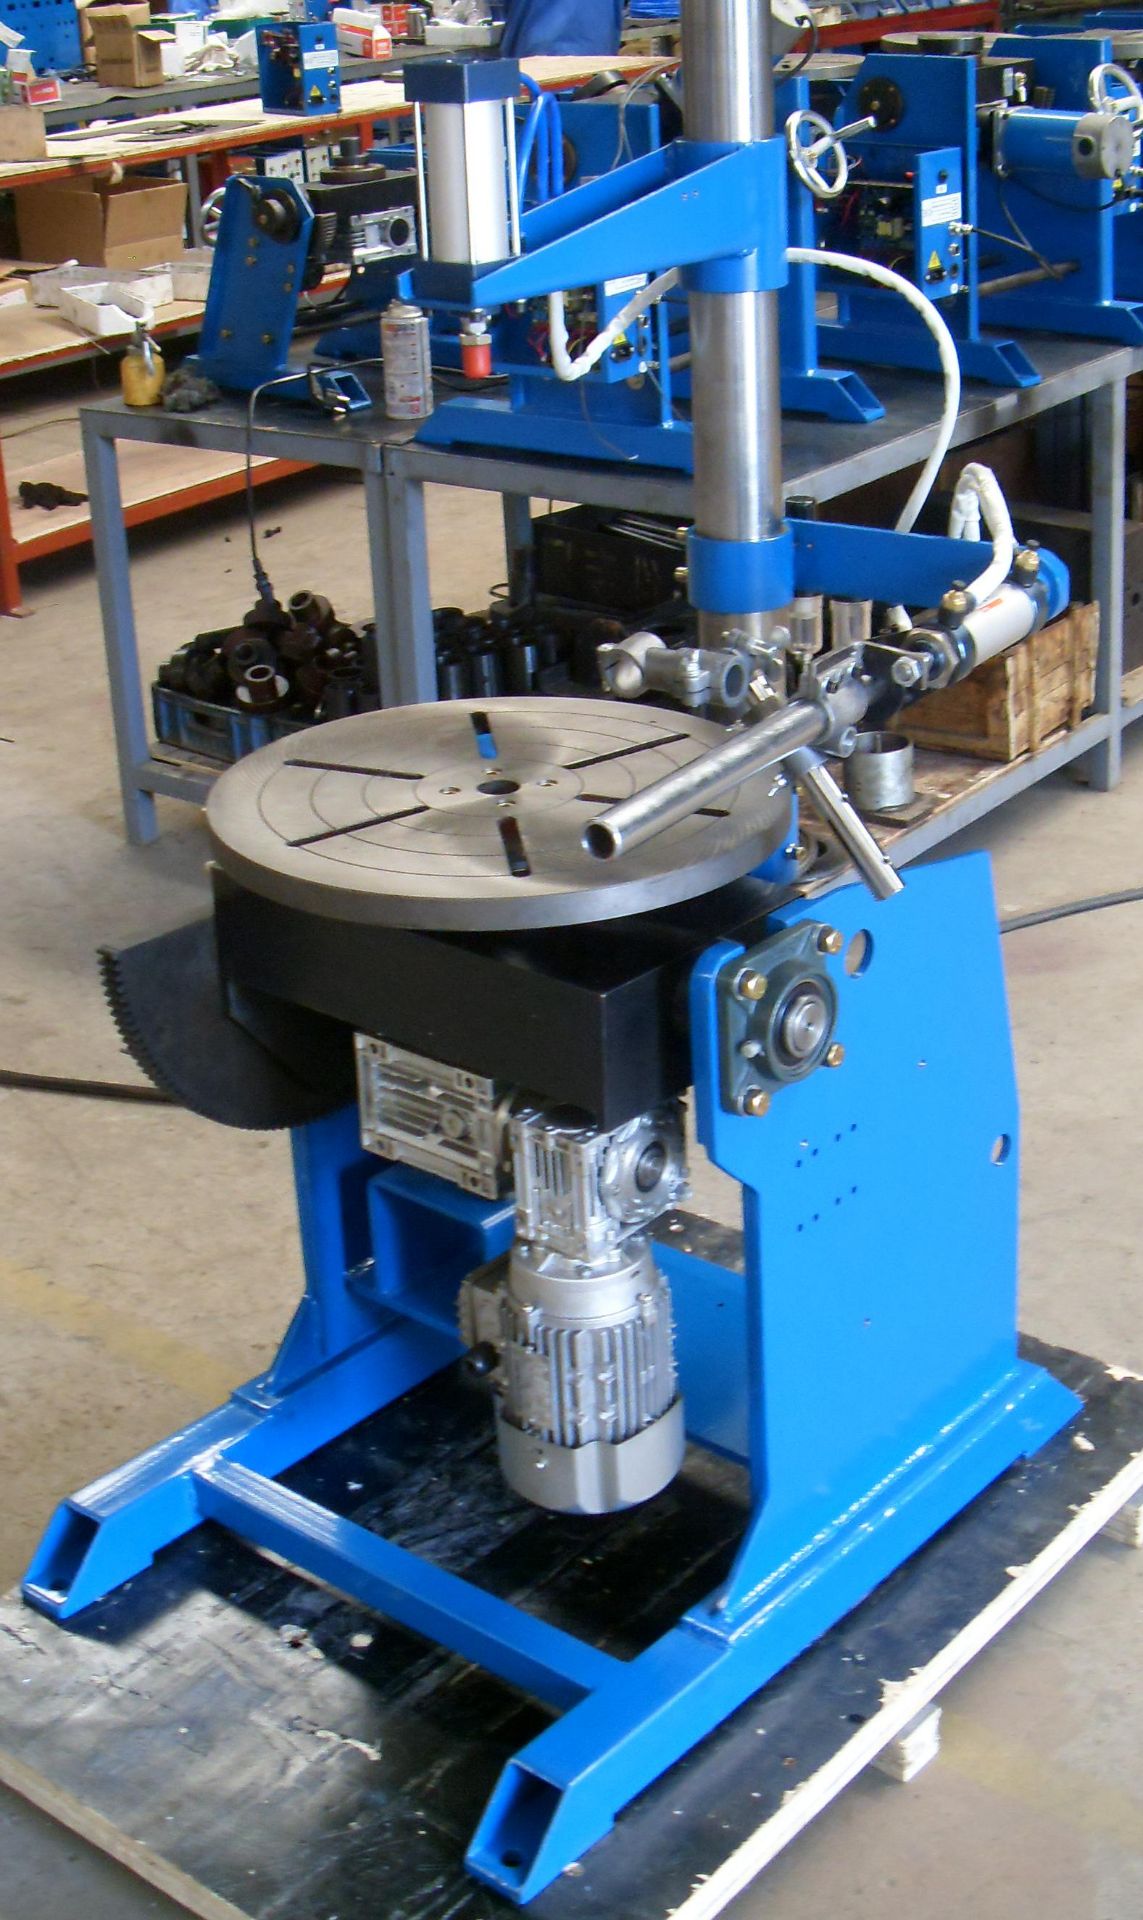 Mint Welding Positioner 1300lbs Capacity, Full rotatation & tilt capability with variable speed